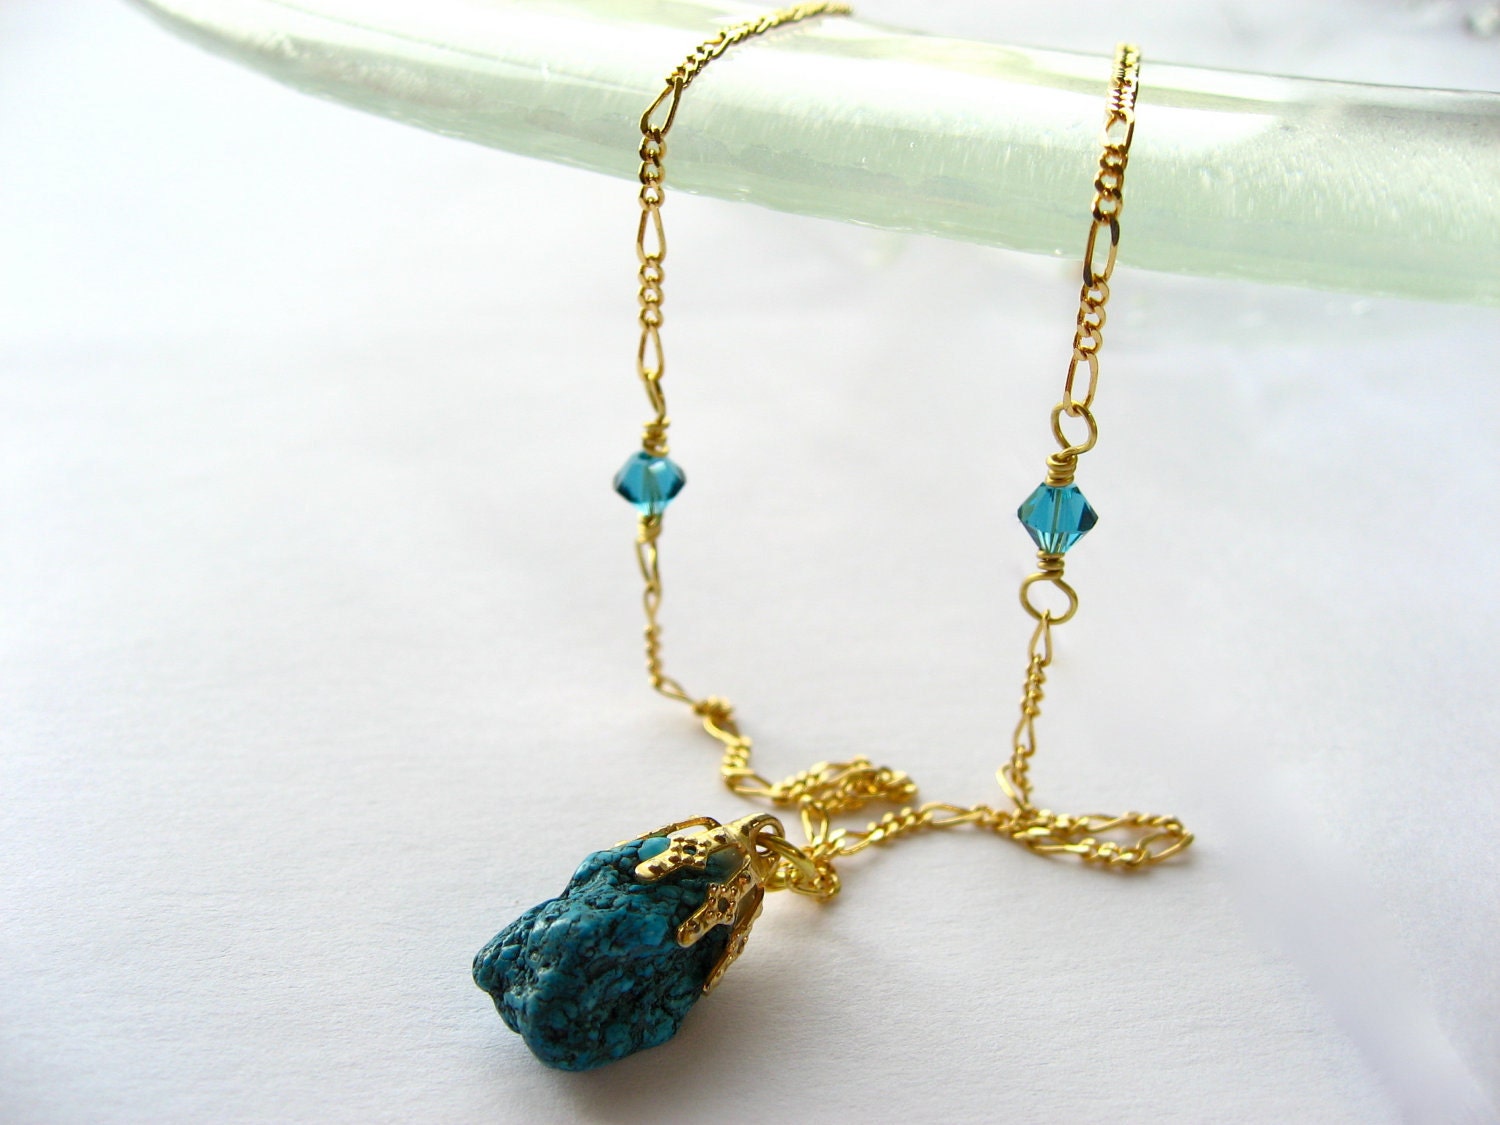 Turquoise Pendant on Gold-Plated Chain with Swarovski Bicone Crystal Accents / Le blog d'awa ETSY 